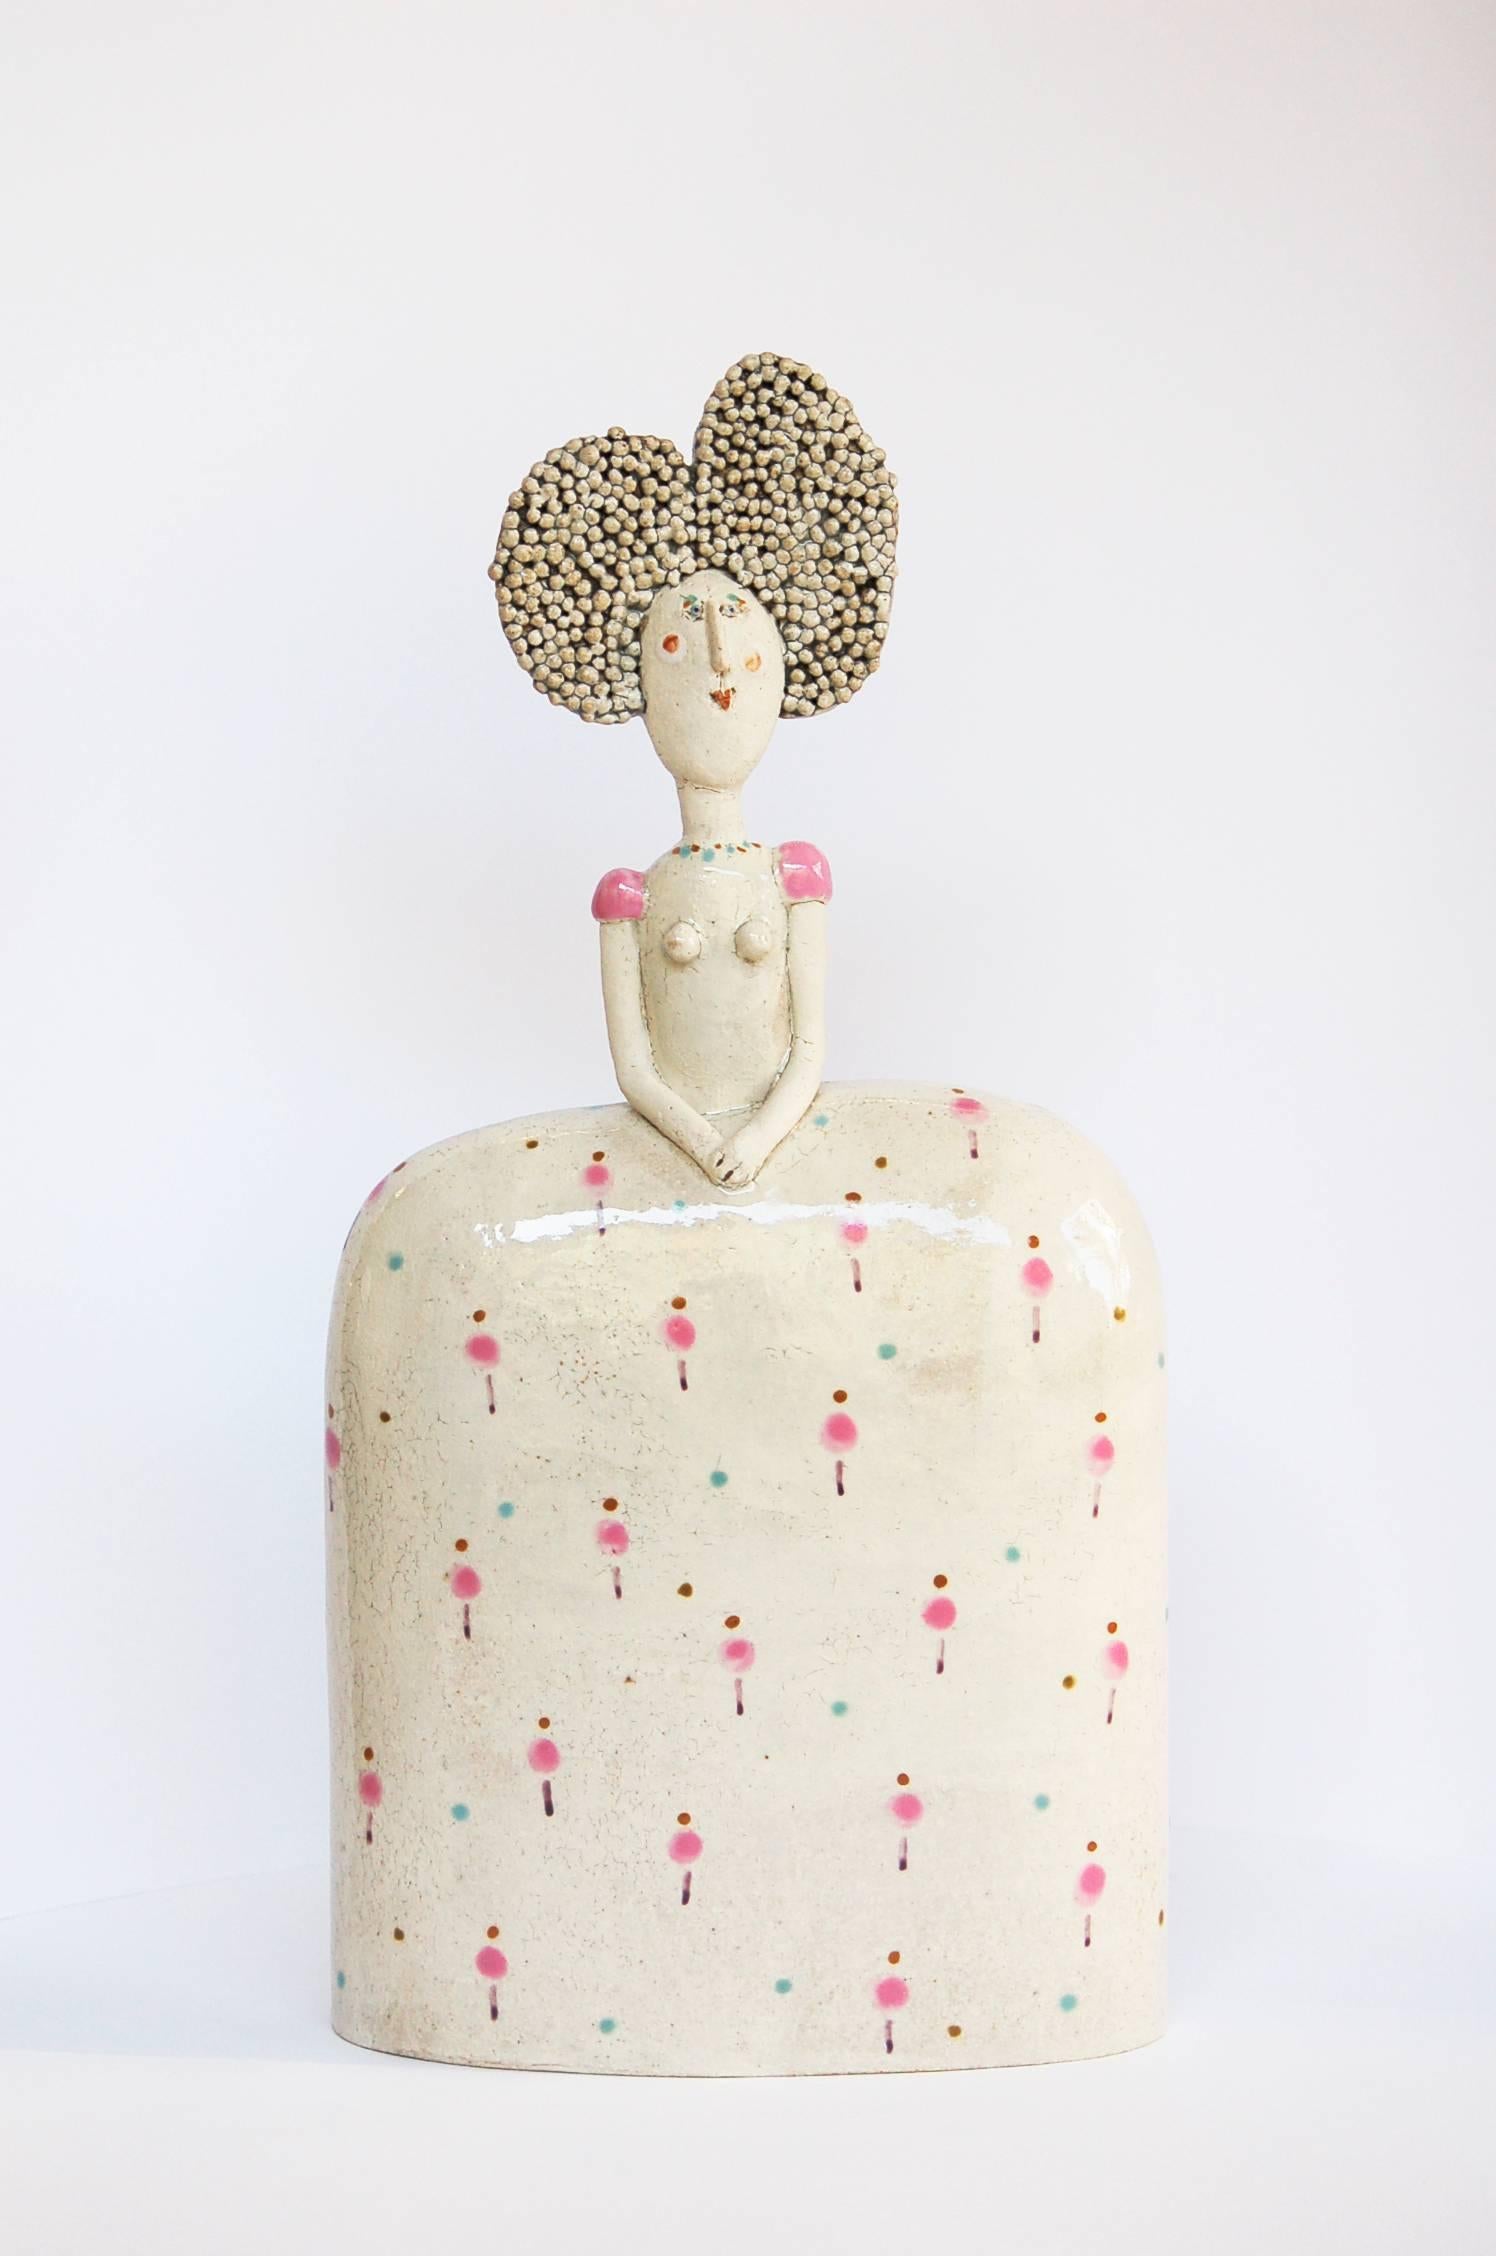 Jane Muir specialises in idiosyncratic hand painted figures representing a witty and uncluttered observation of the world. They are hand modelled, allowing her the freedom to sketch with clay and develop ideas during the making process. Jane's